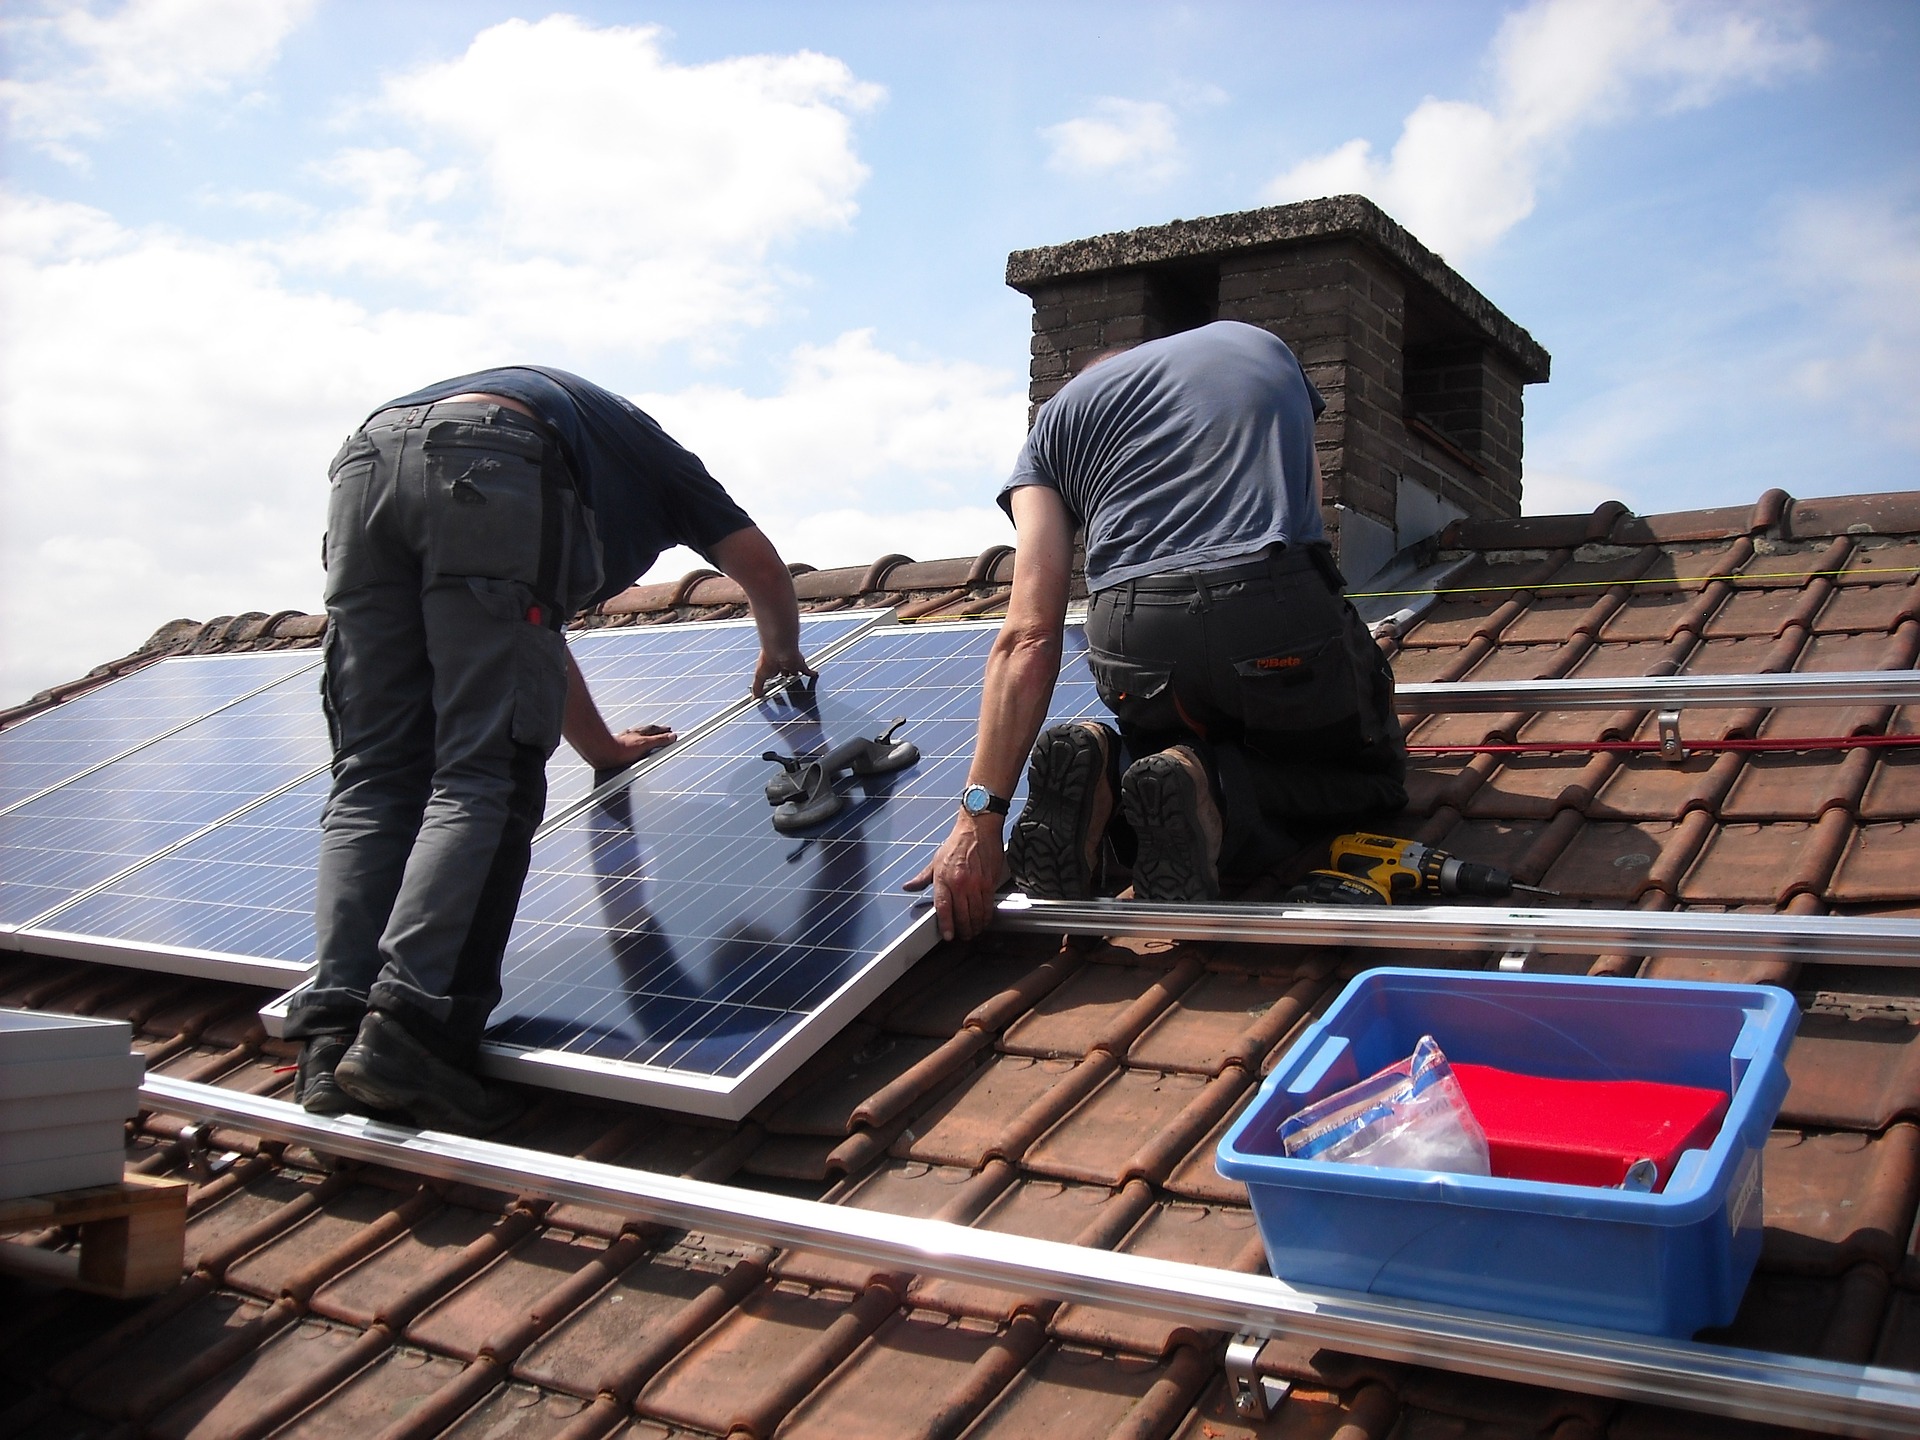 Rooftop solar PV